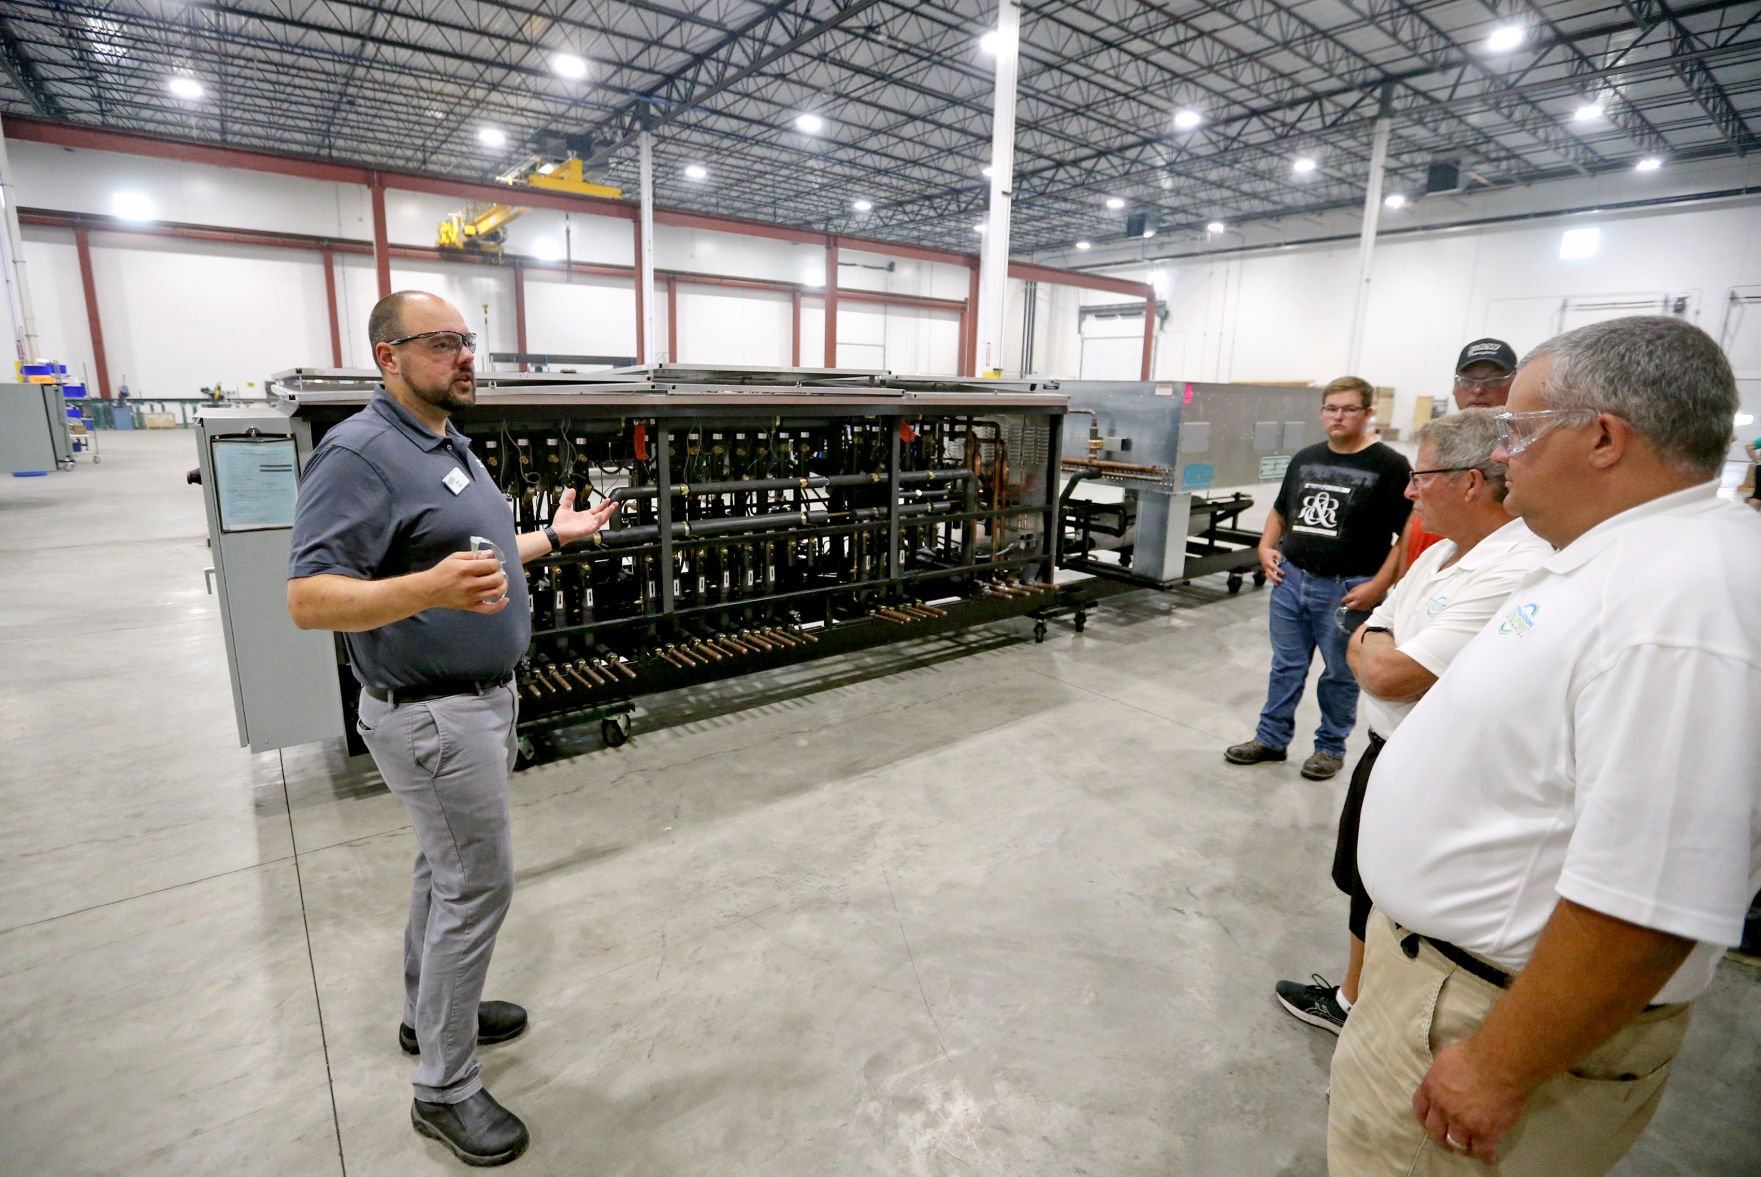 Ben Fisher (left) gives a tour of Zero Zone during an event at the facility in Dyersville, Iowa, on Wednesday, July 20, 2022.    PHOTO CREDIT: JESSICA REILLY